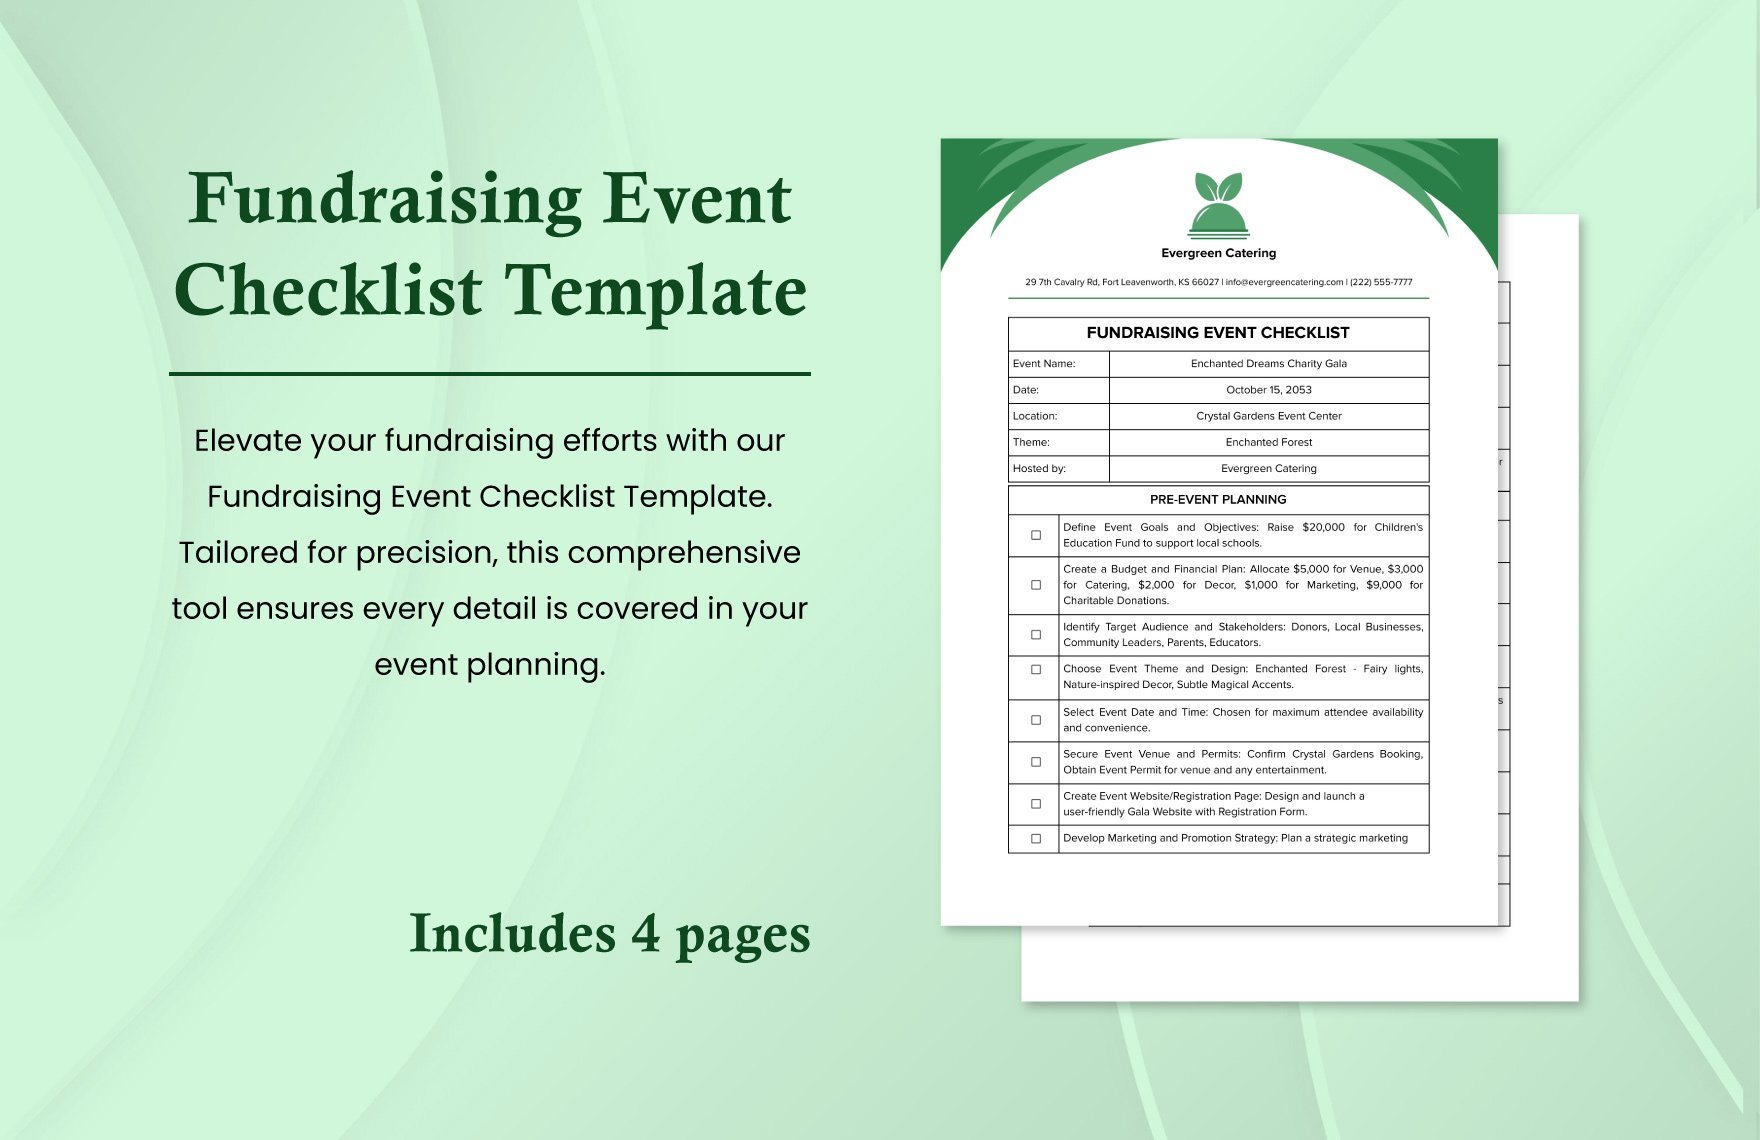 Fundraising Event Checklist Template